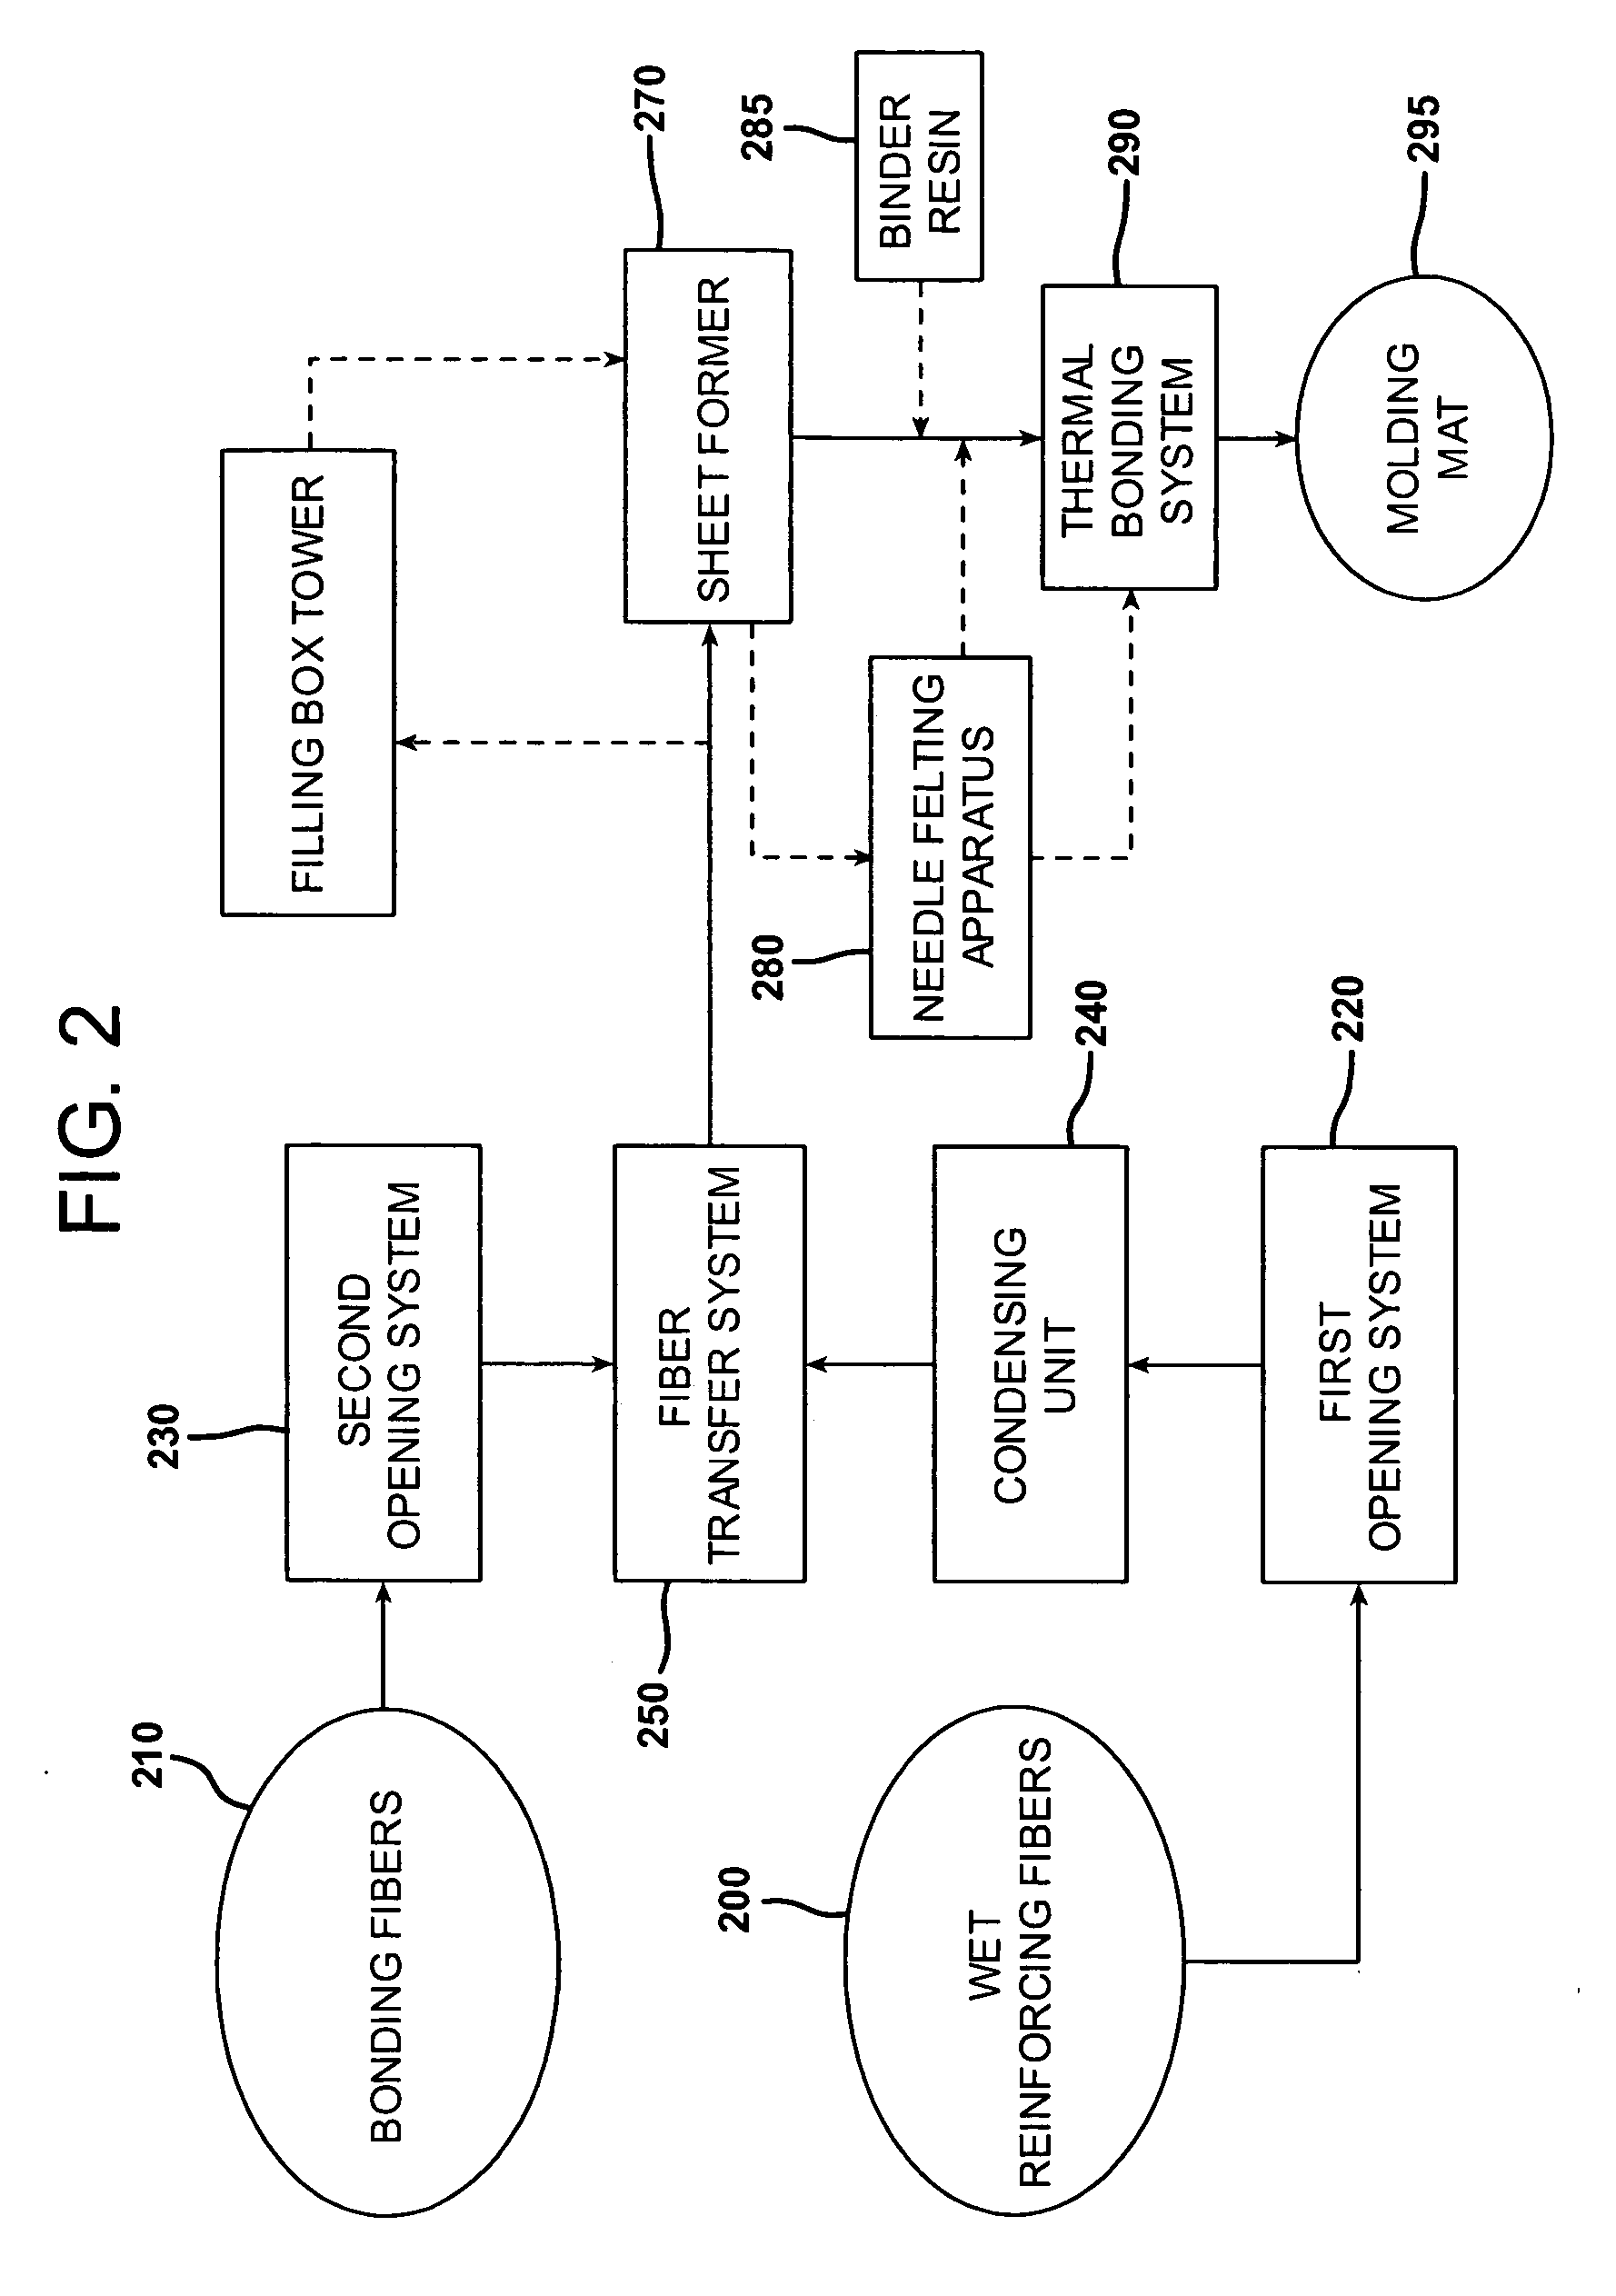 Polymer/WUCS mat for use in sheet molding compounds